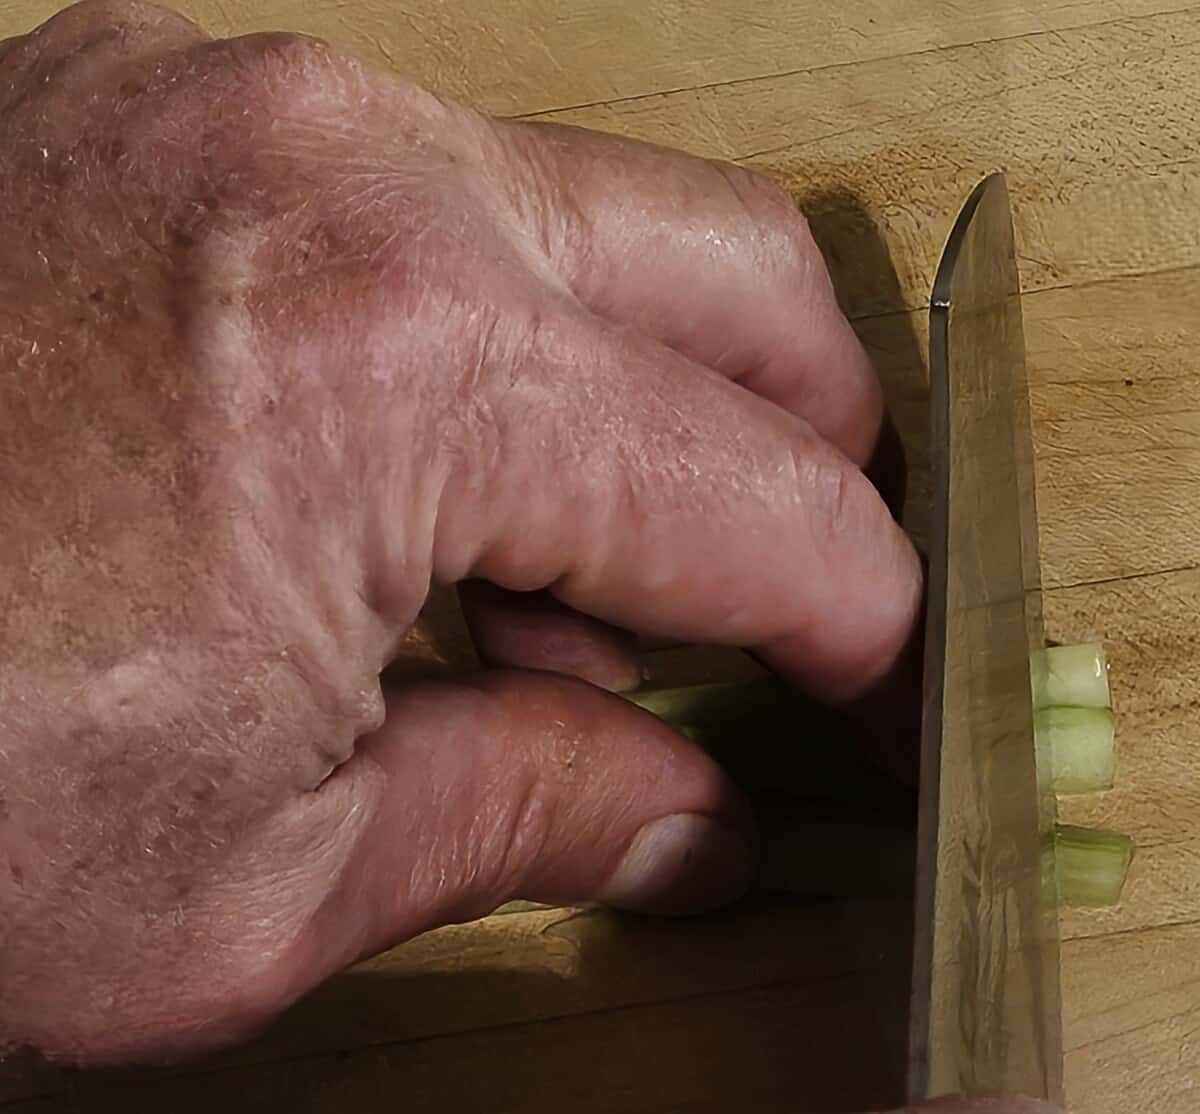 hand and knife cutting celery into brunoise dice, showing proper technique